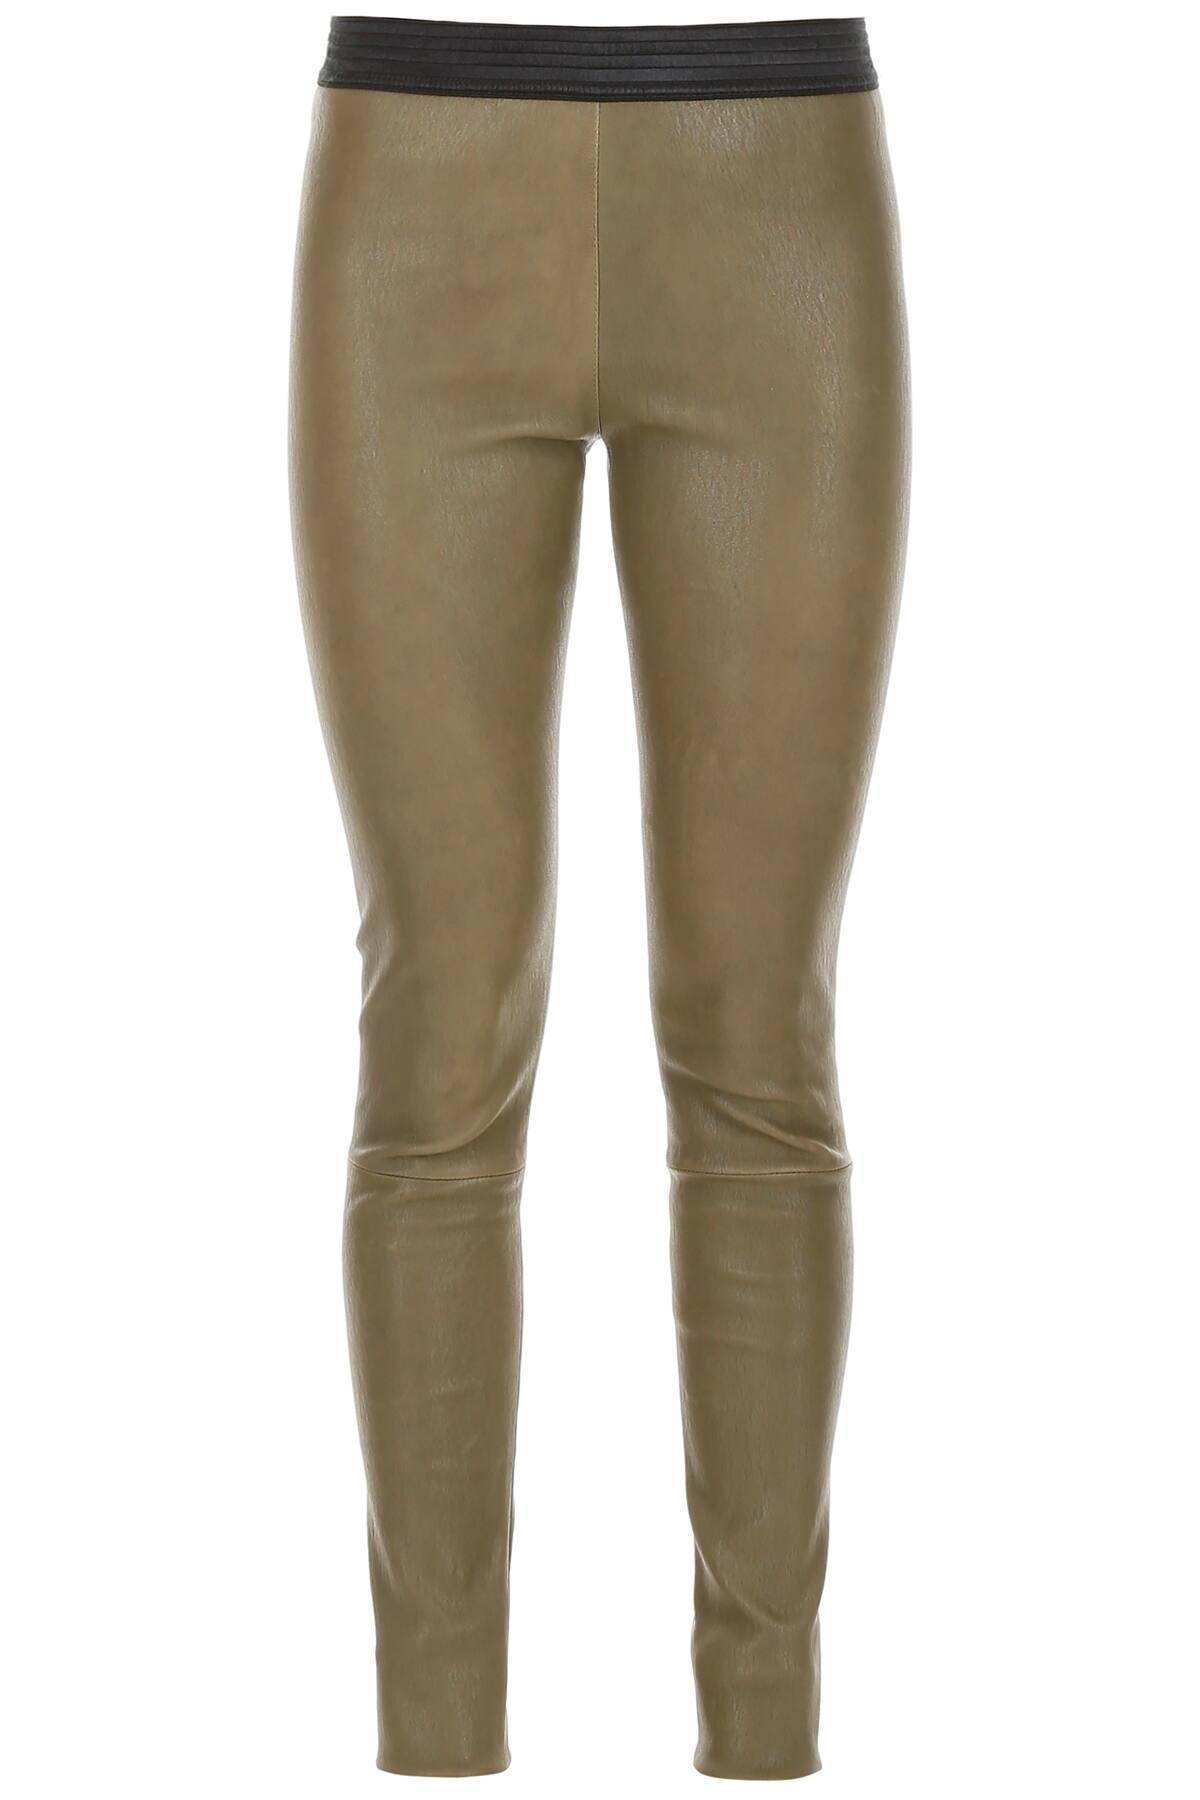 DROMe Leather Leggings in Sage Green (Green) - Save 50% - Lyst